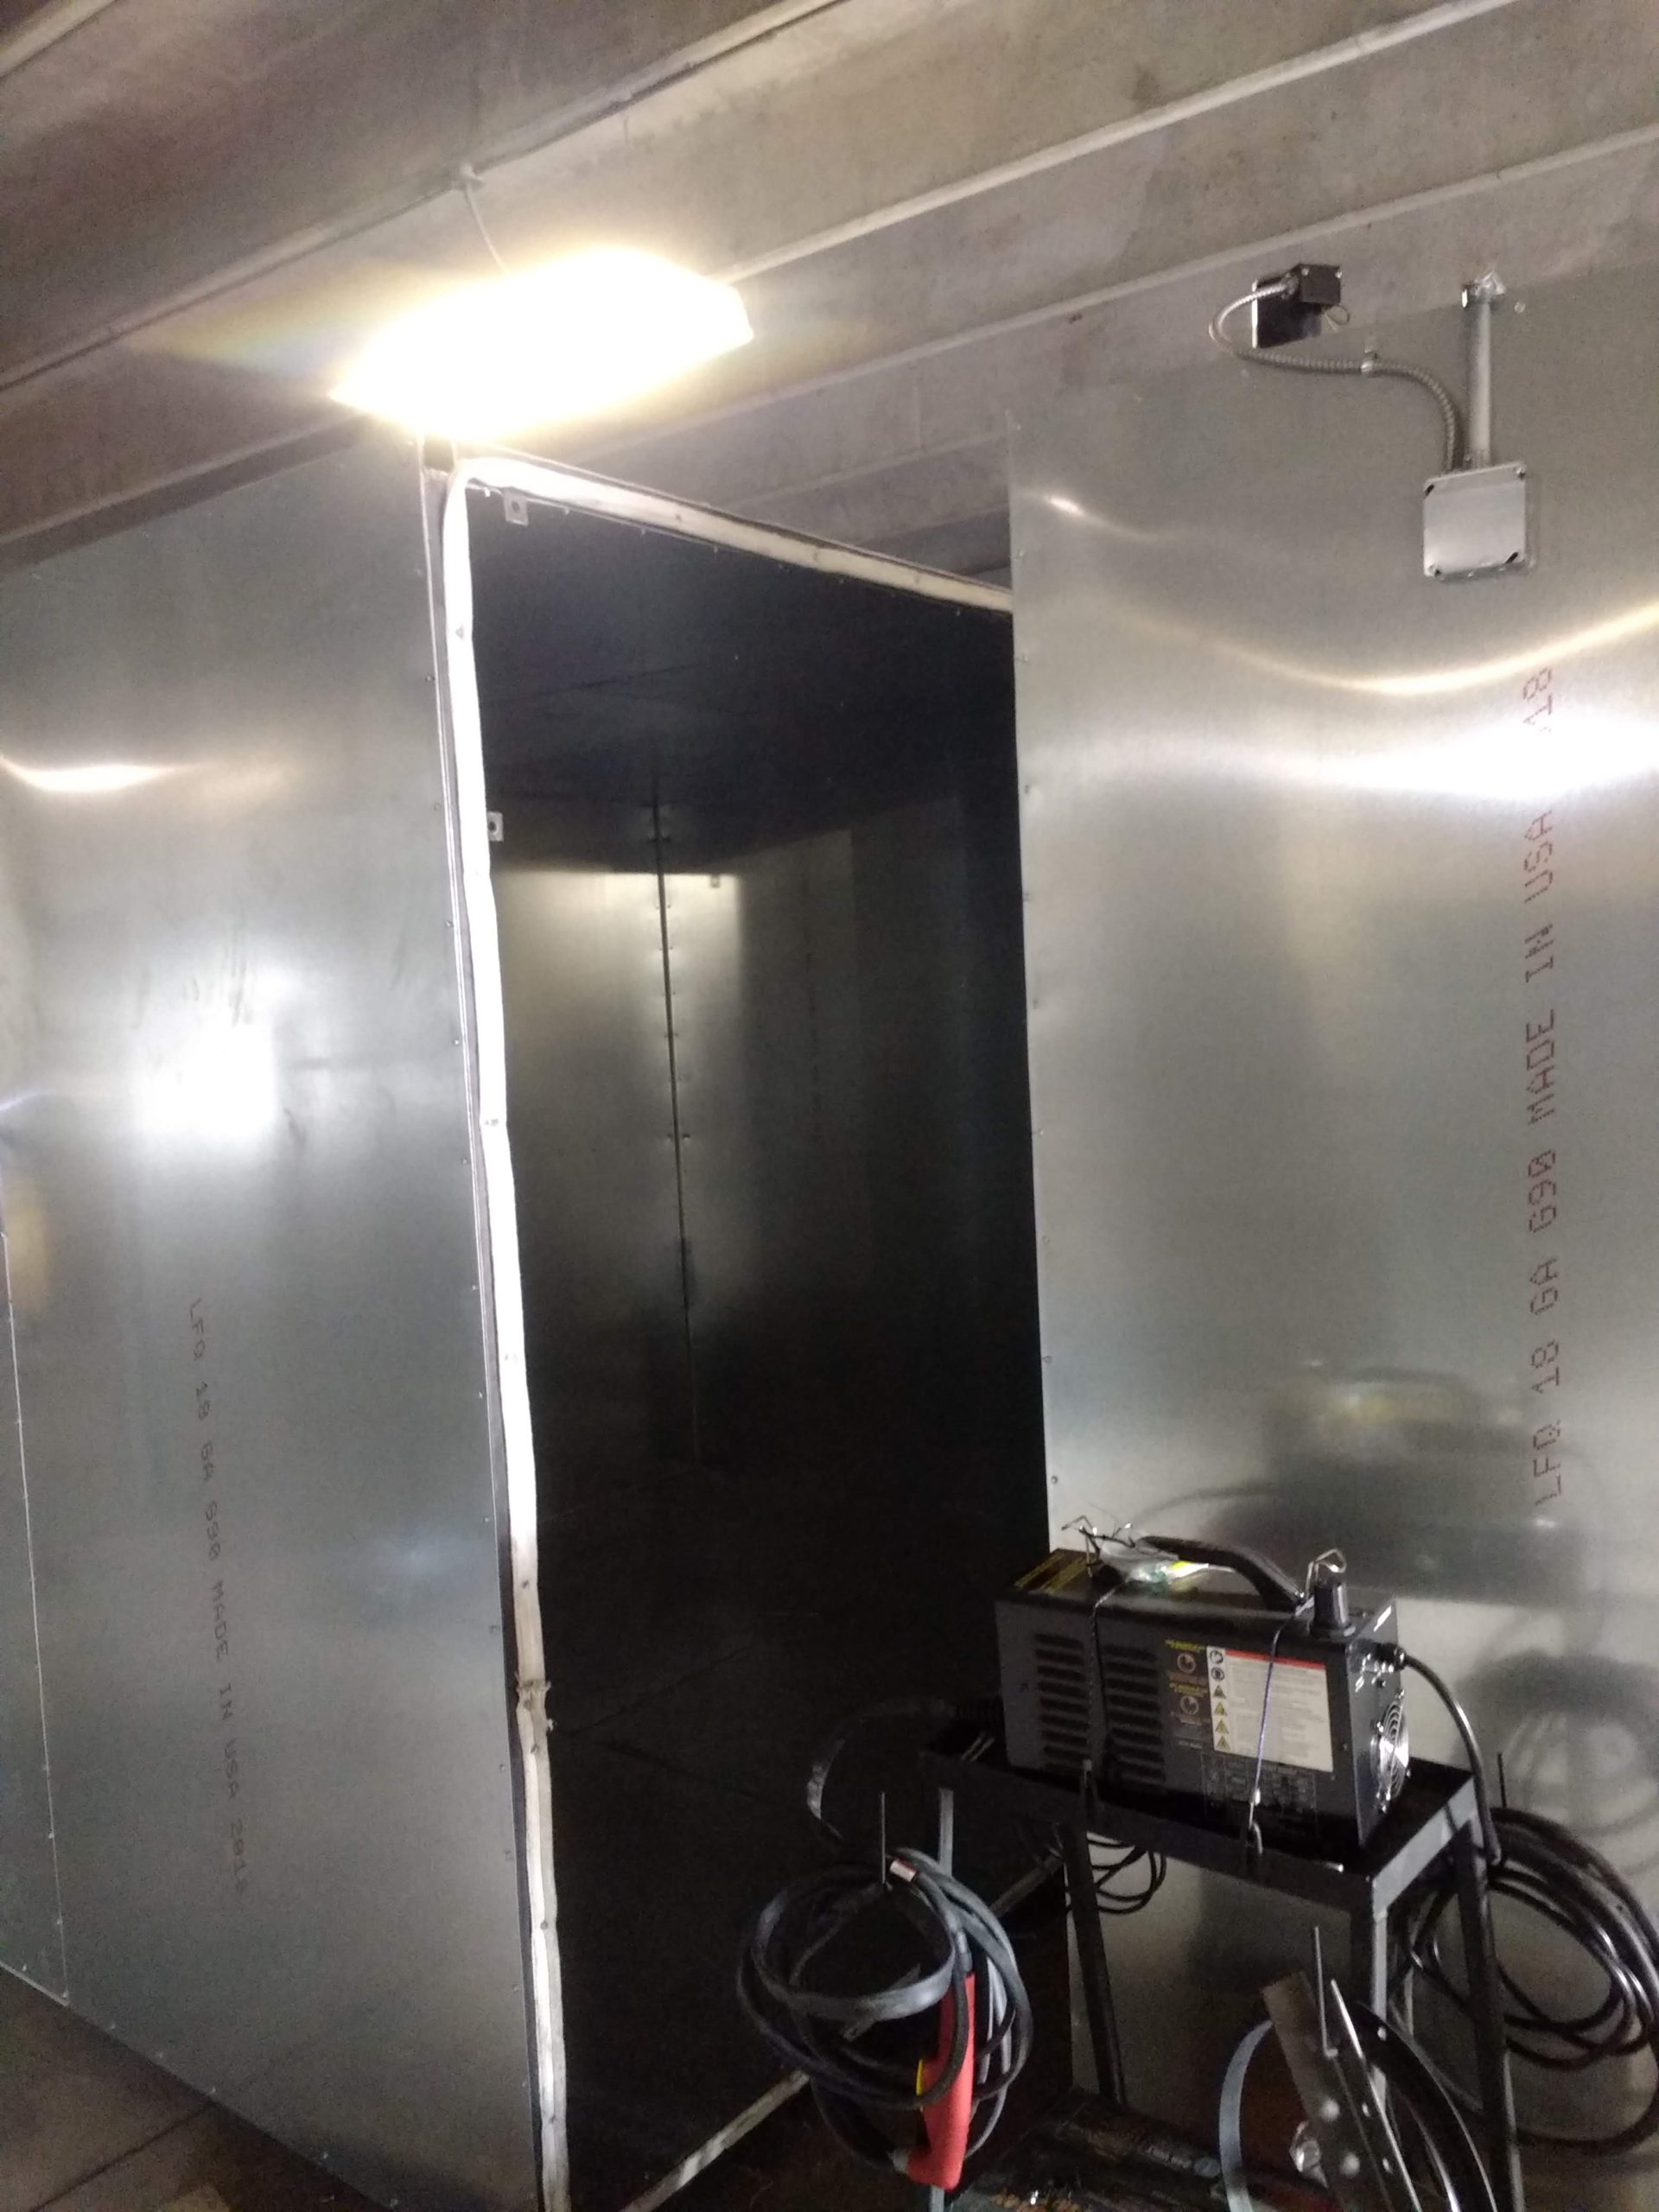 https://www.eptexcoatings.com/wp-content/uploads/2019/09/8x10x16-480V-oven-1-scaled.jpg